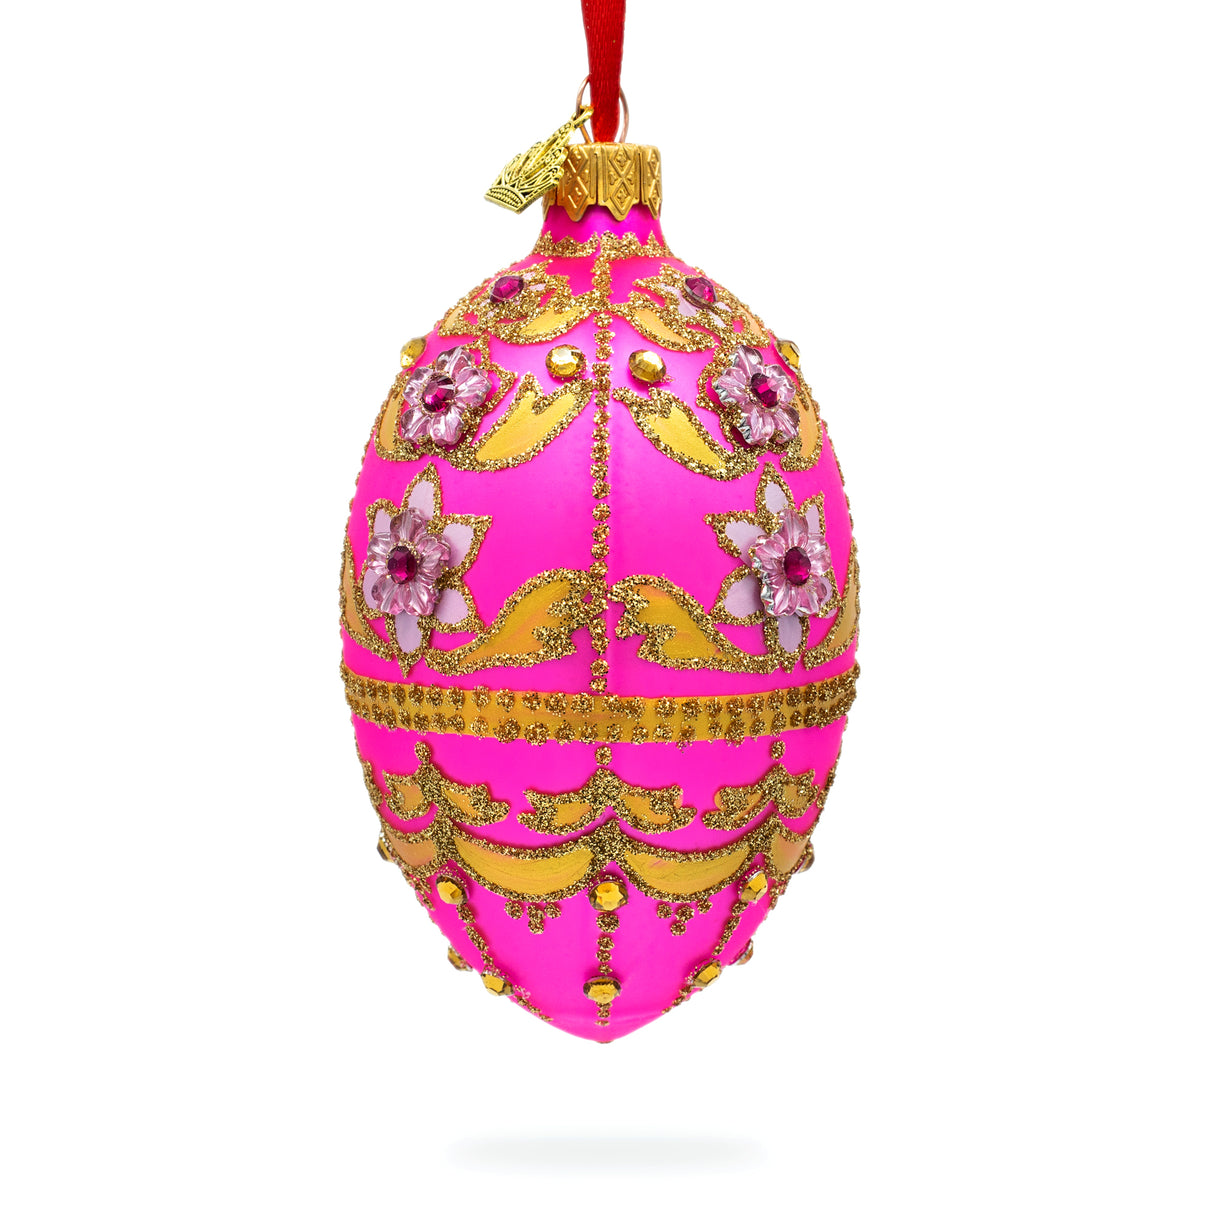 Jeweled Flowers on Pink Glass Egg Ornament 4 Inches in Pink color, Oval shape